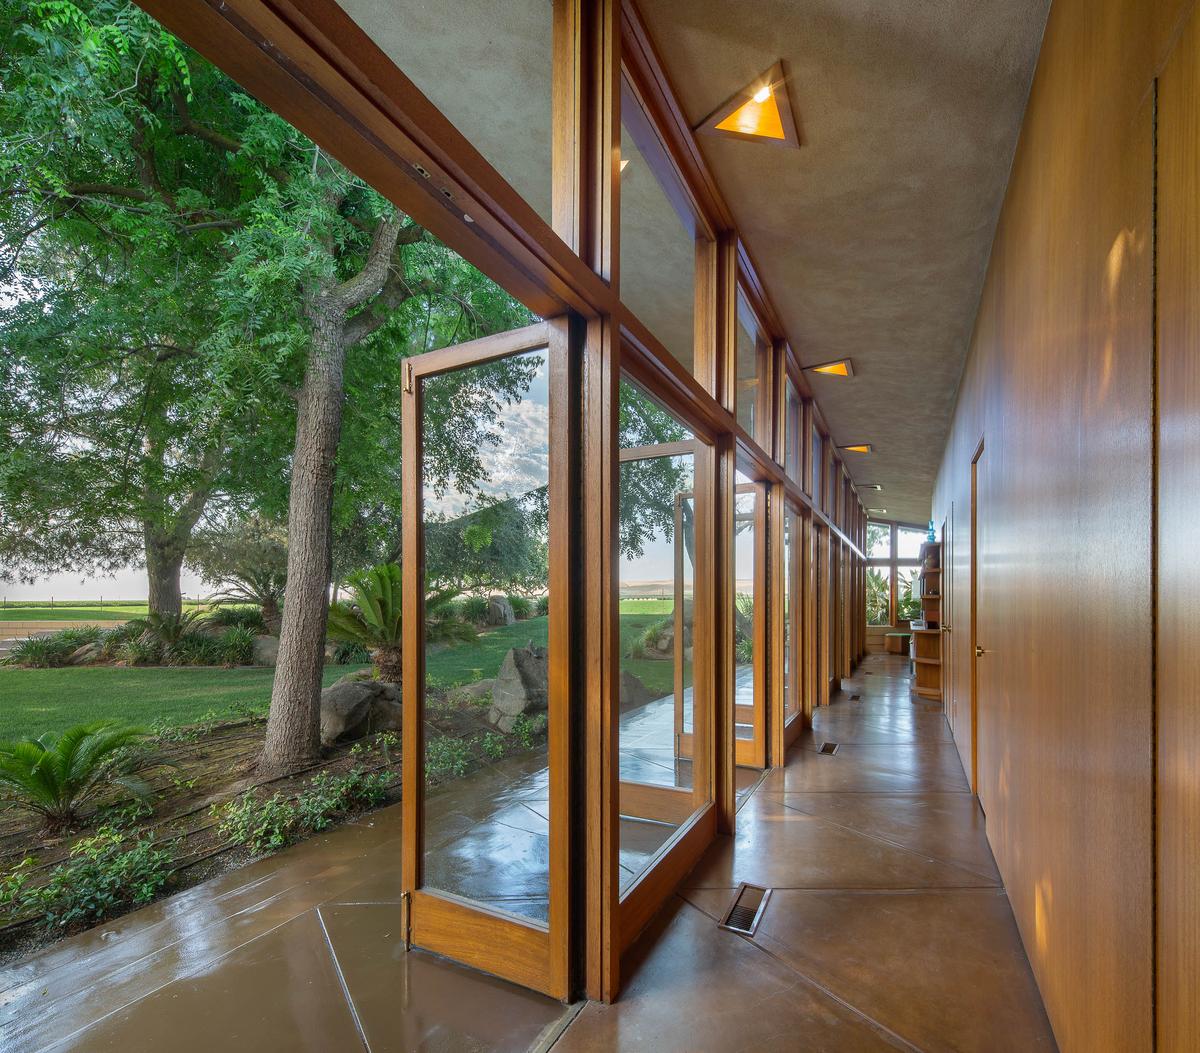 The home's wood-framed glass walls can be opened to allow in cooling breezes. Tile floors, recessed lighting, and wood paneling provide a warm ambiance. (Courtesy of Crosby Doe)